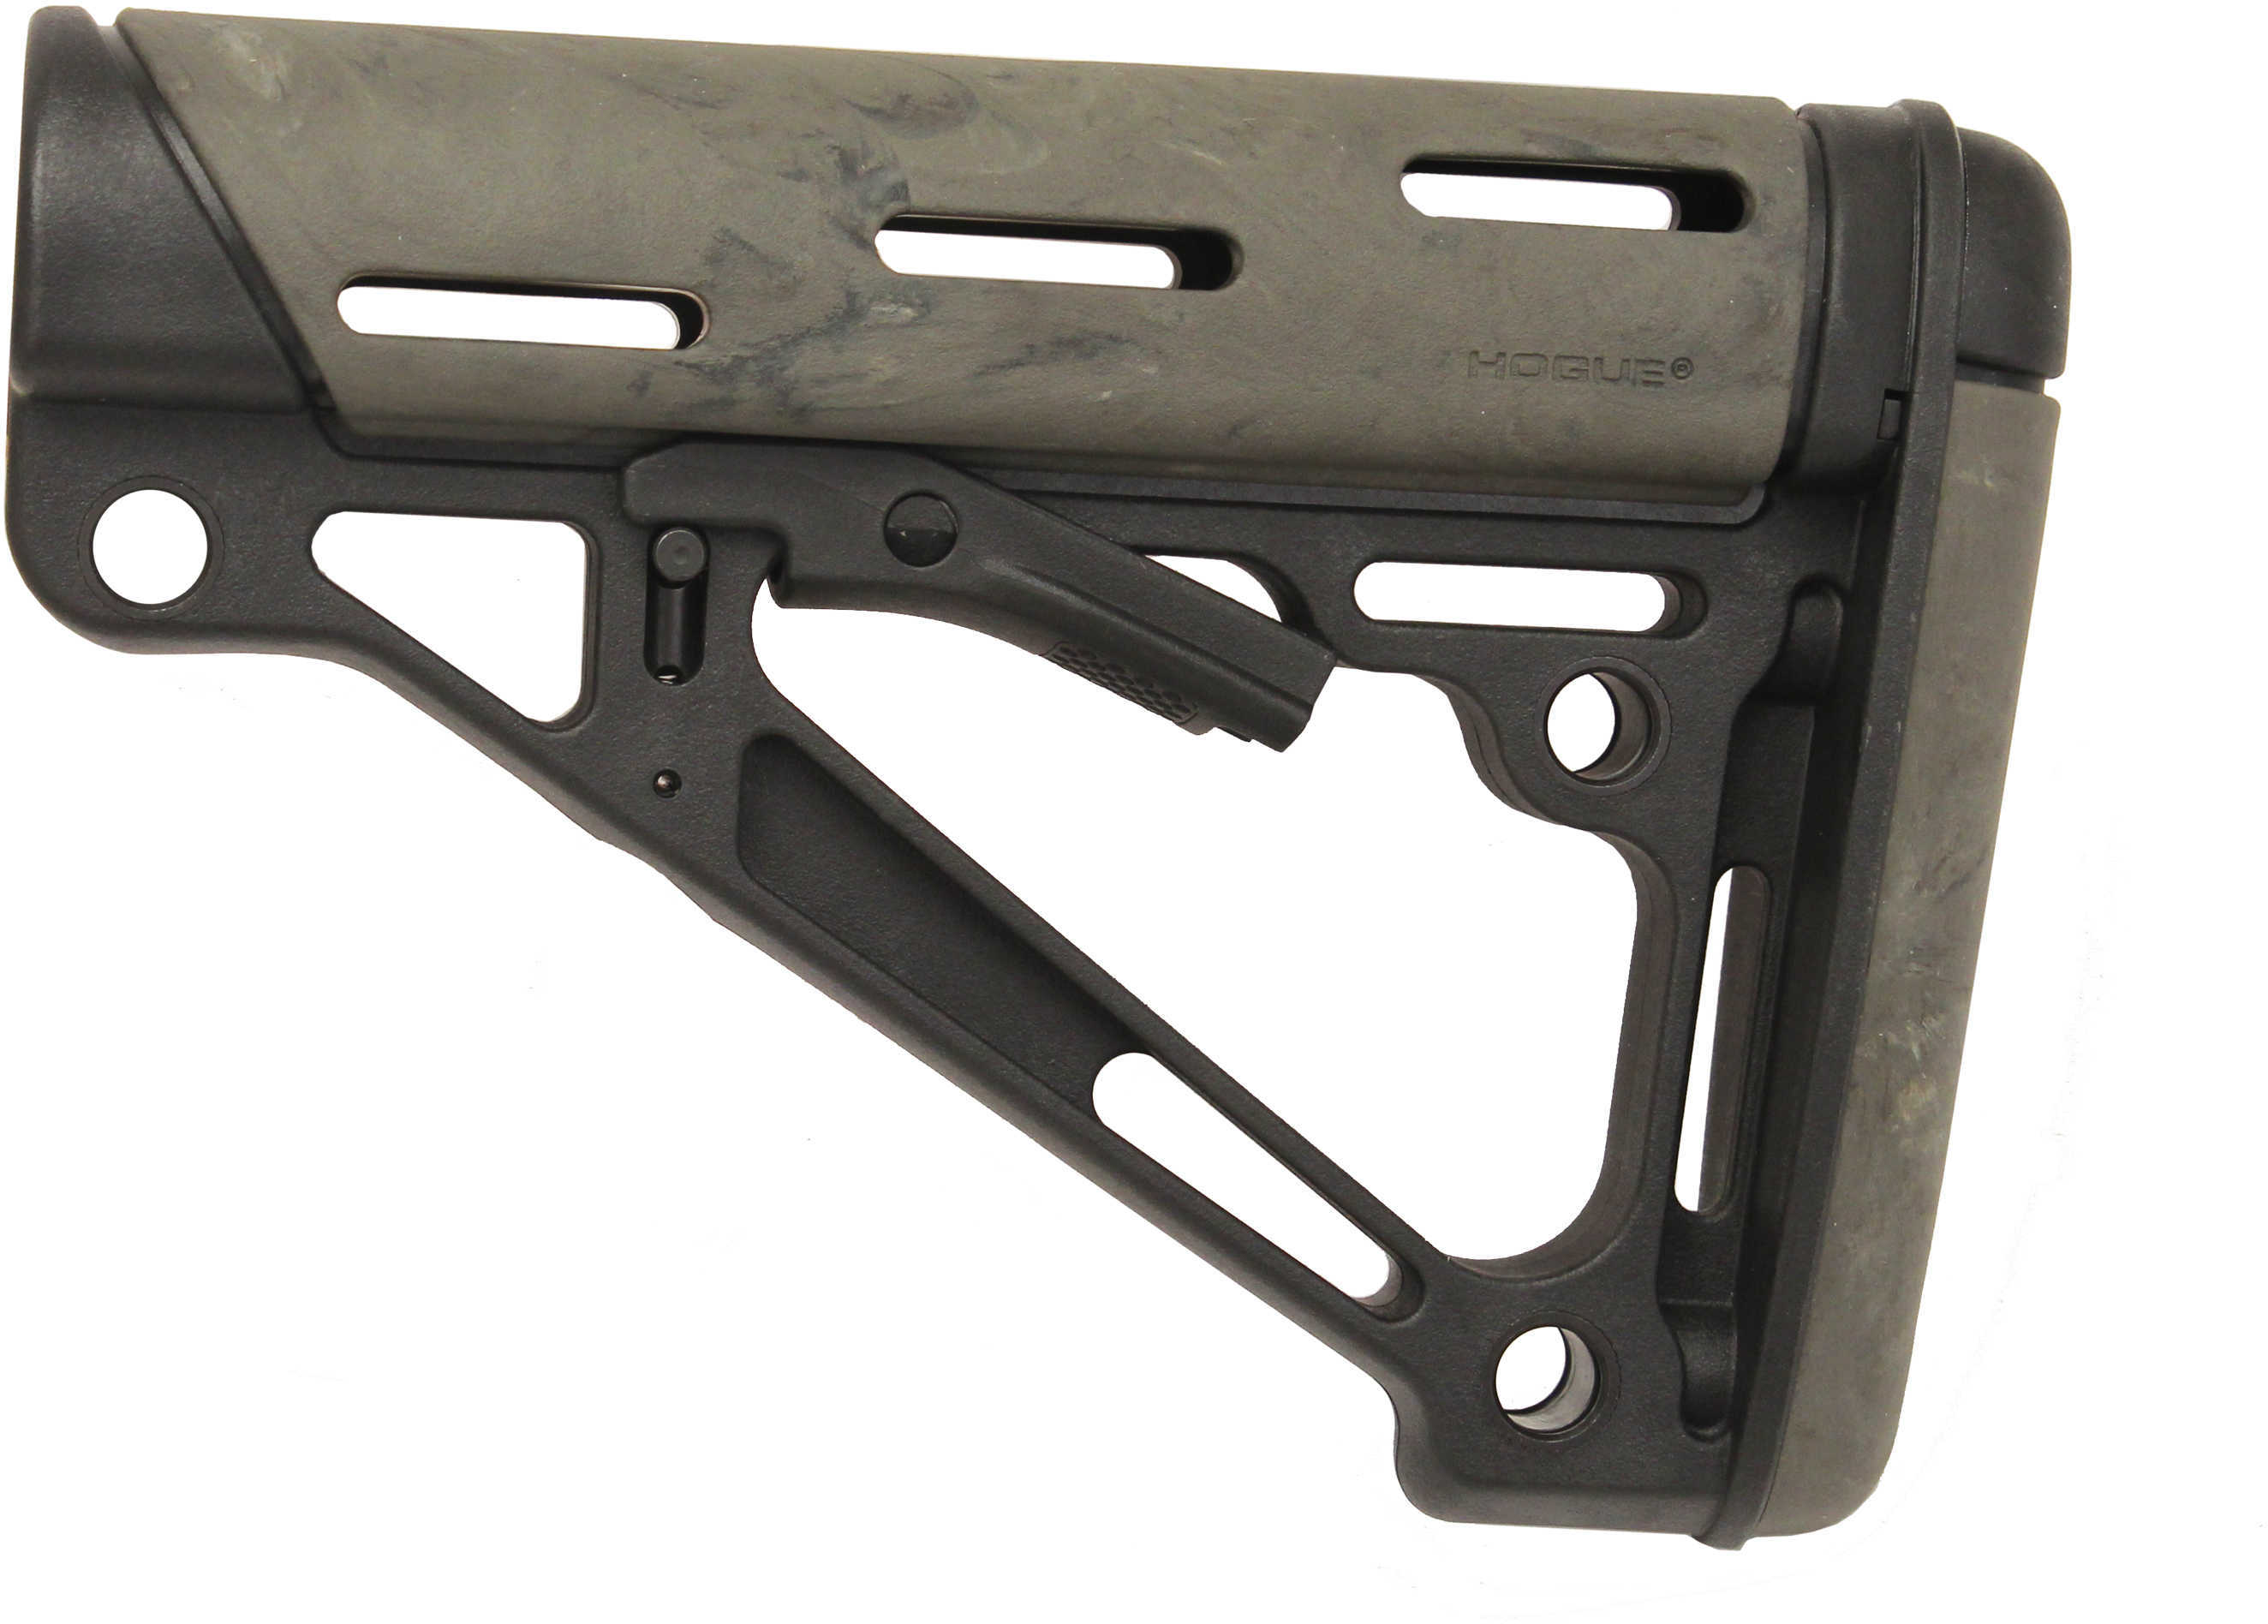 Hogue AR15 OMC Buttstock - Mil-Spec Ghillie Green Md: 15840